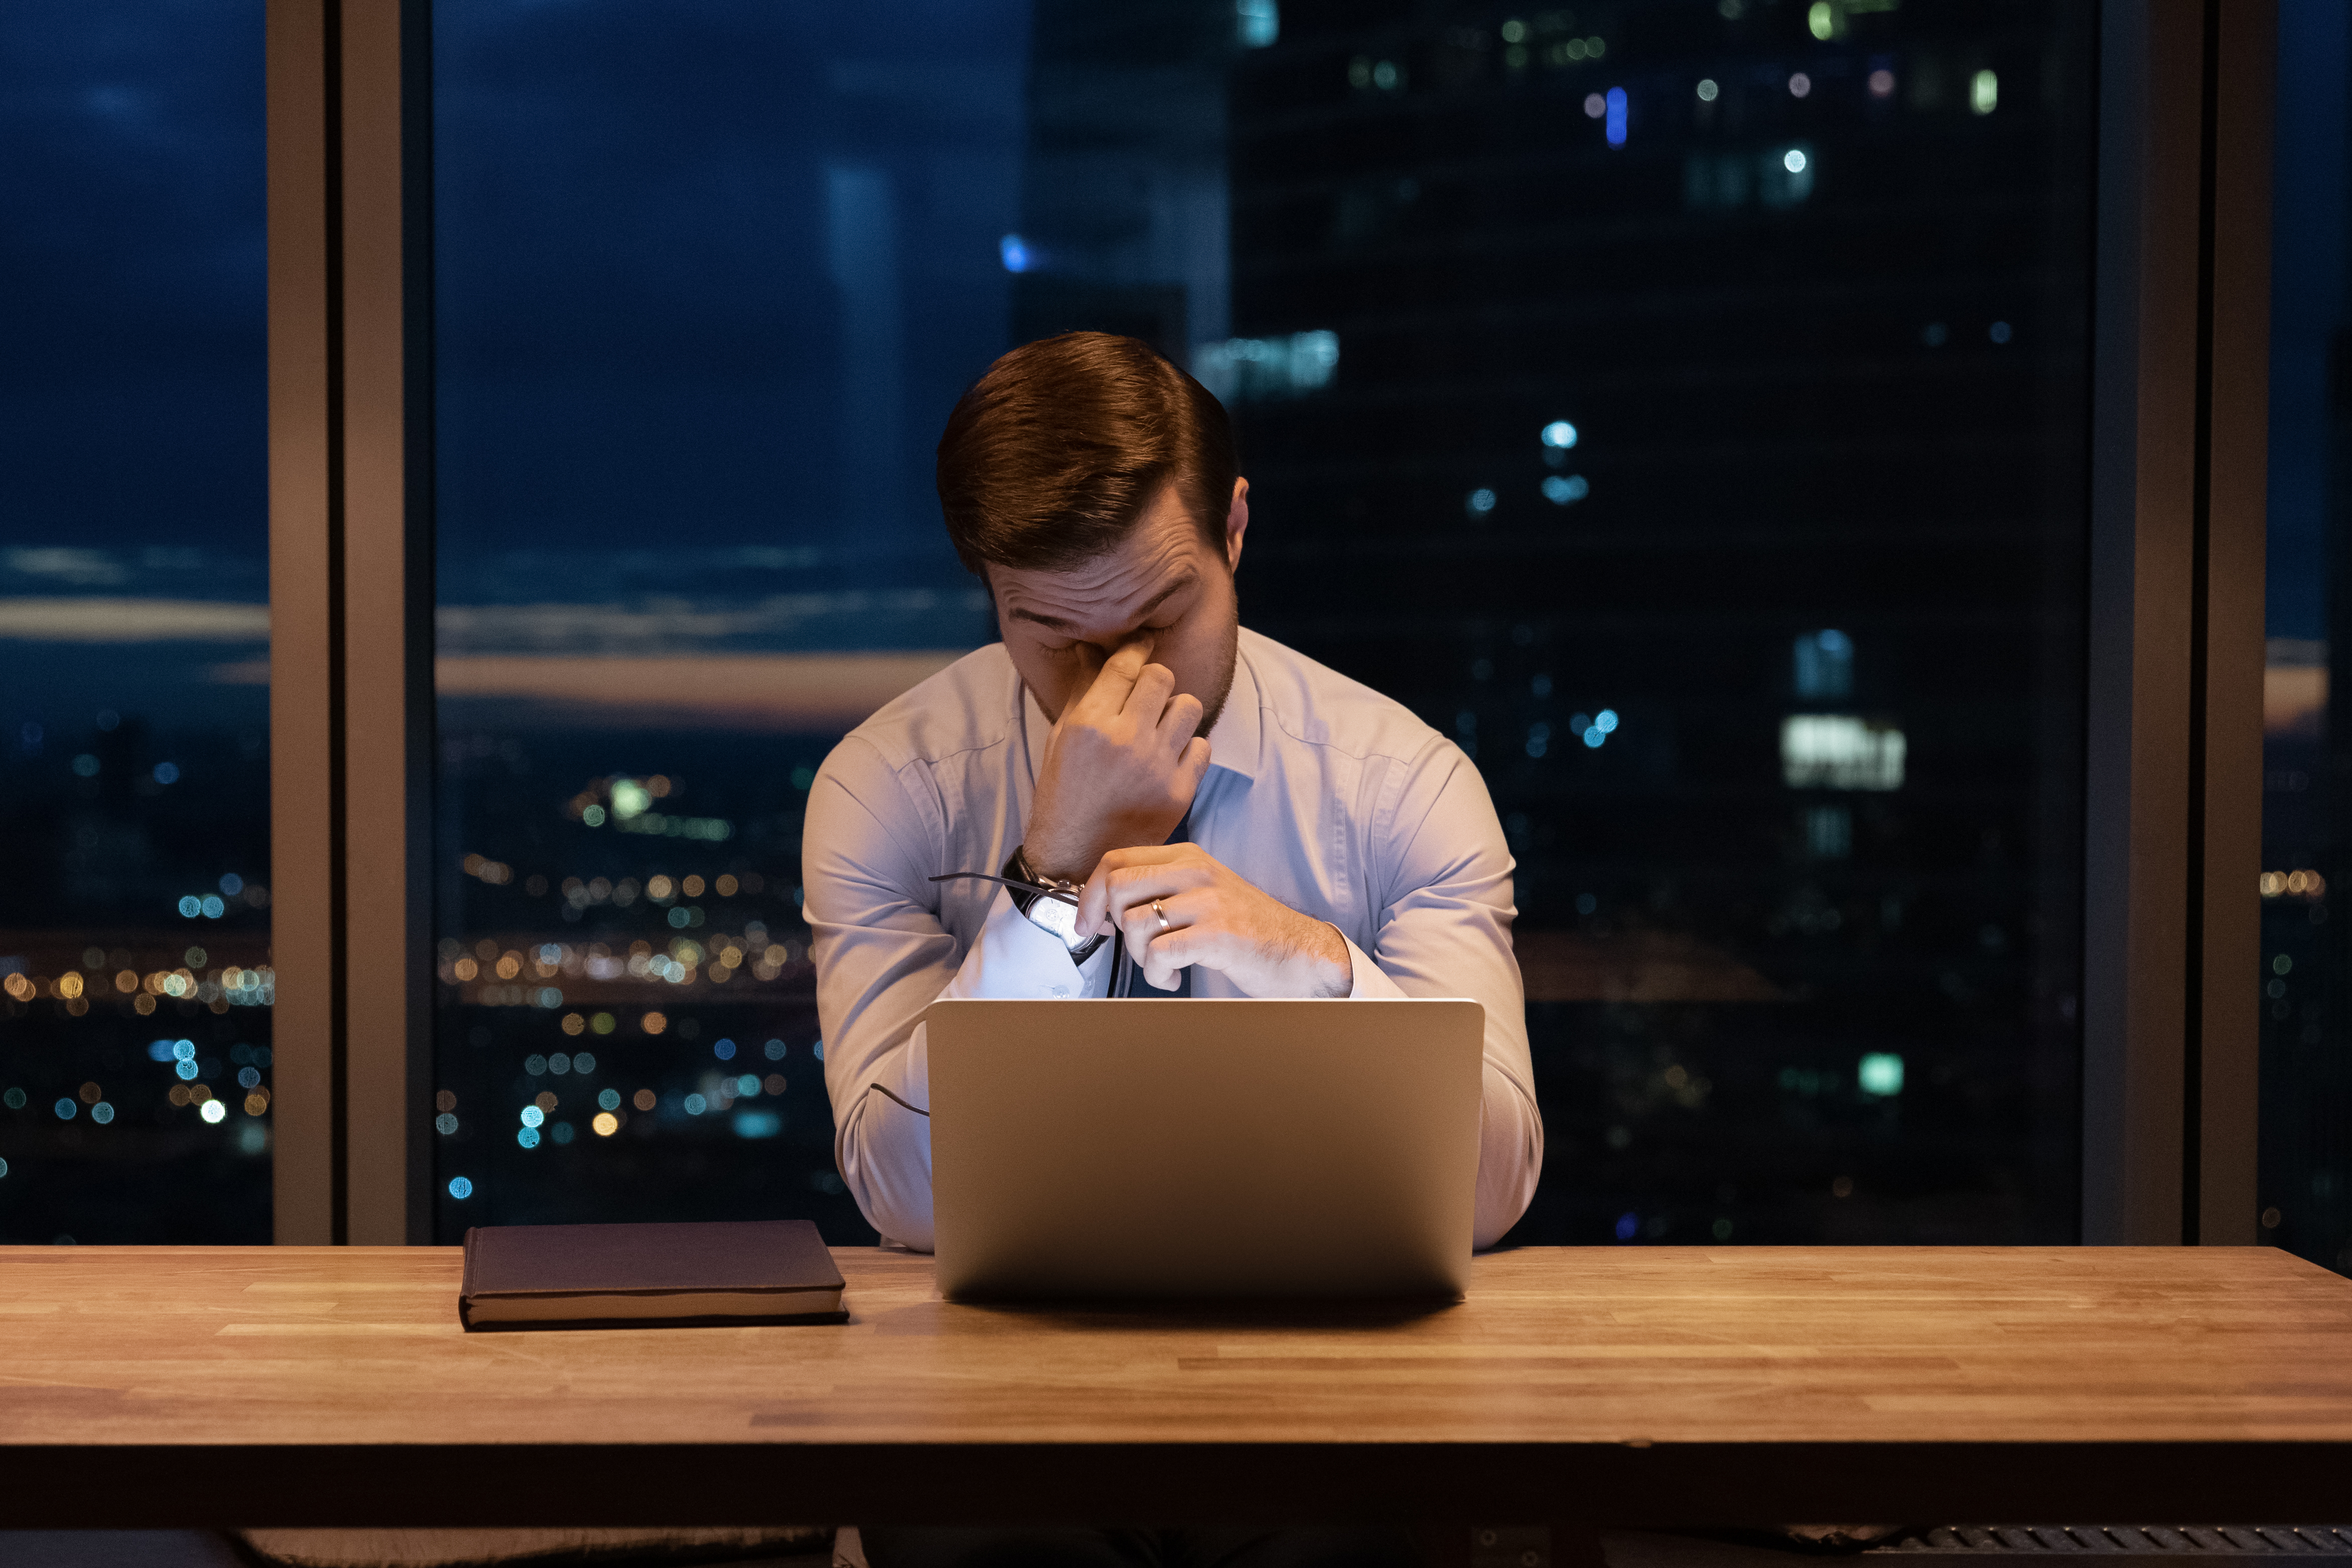 An overworked man feeling tired while working on his laptop at night | Source: Shutterstock